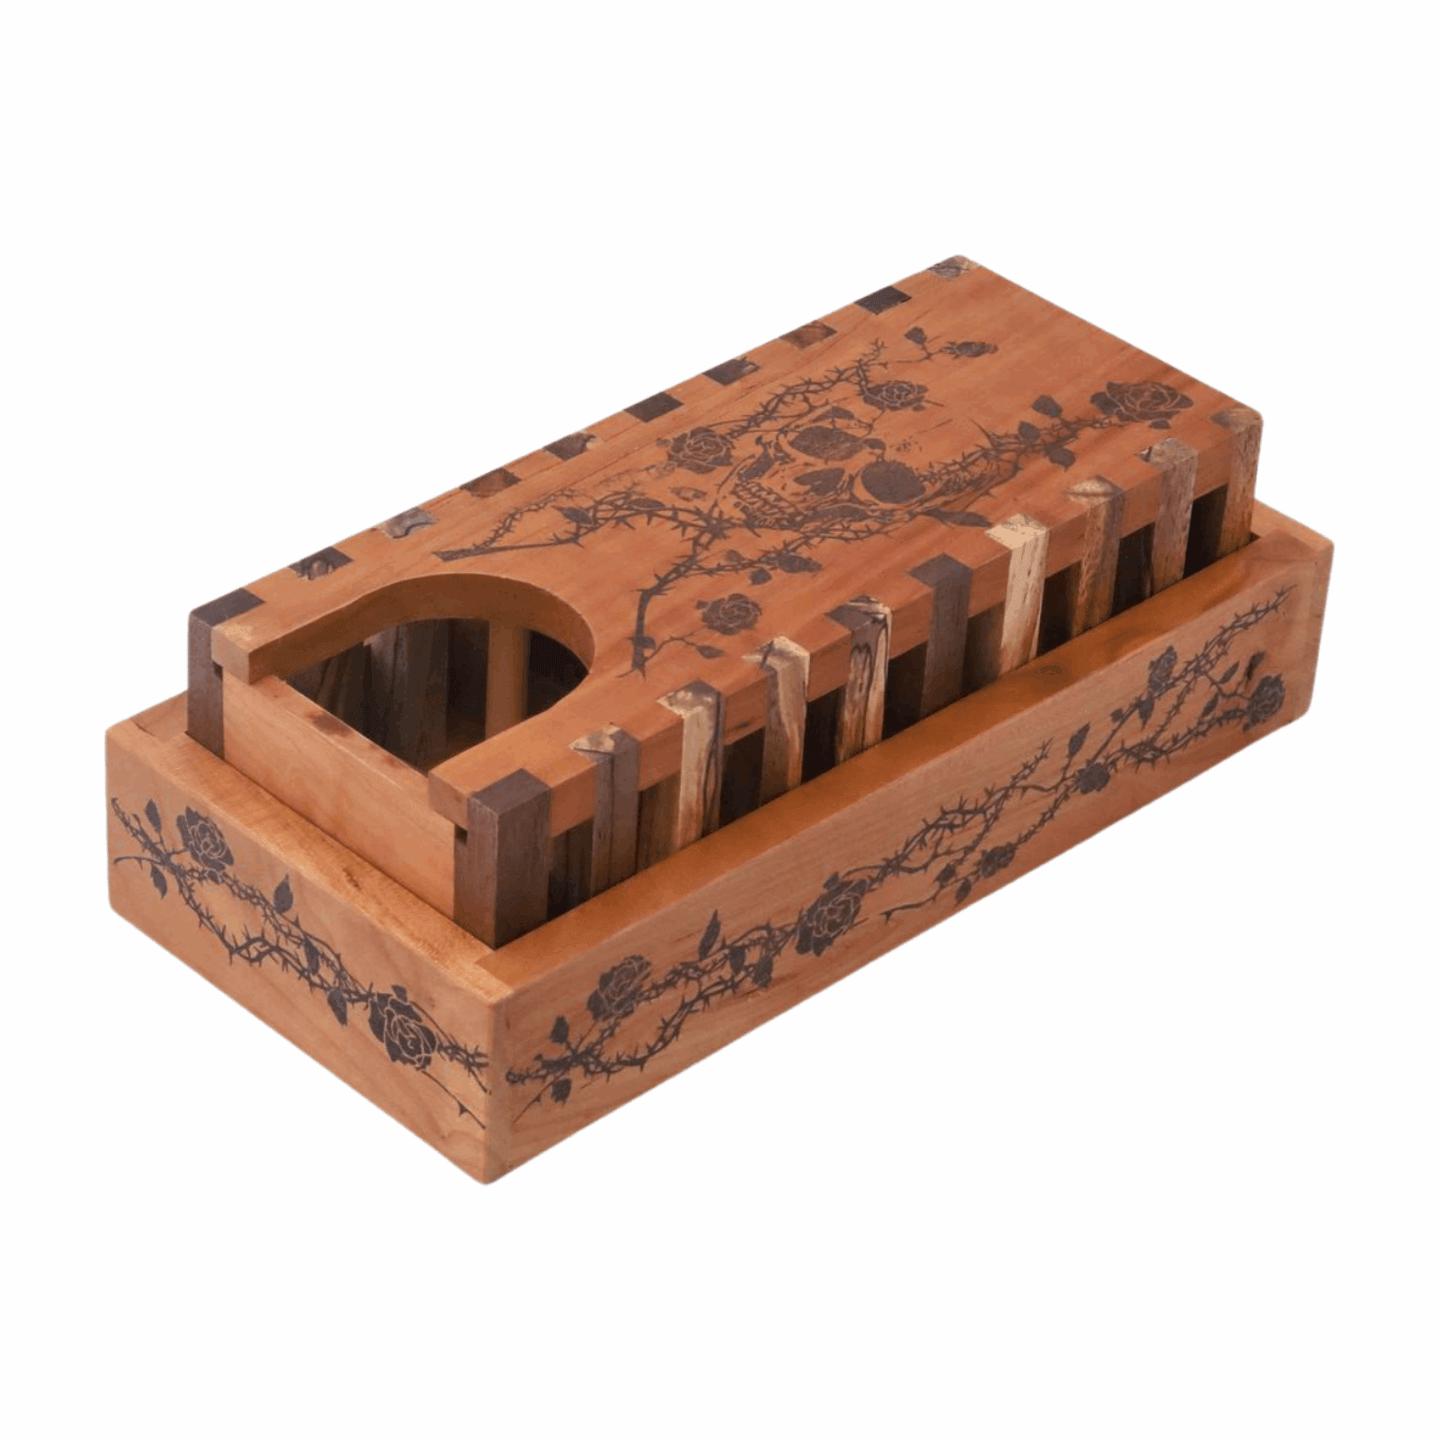 Cherry and Walnut Skeleton Design Dice Tower with Skull and Roses - Dragon Armor Games